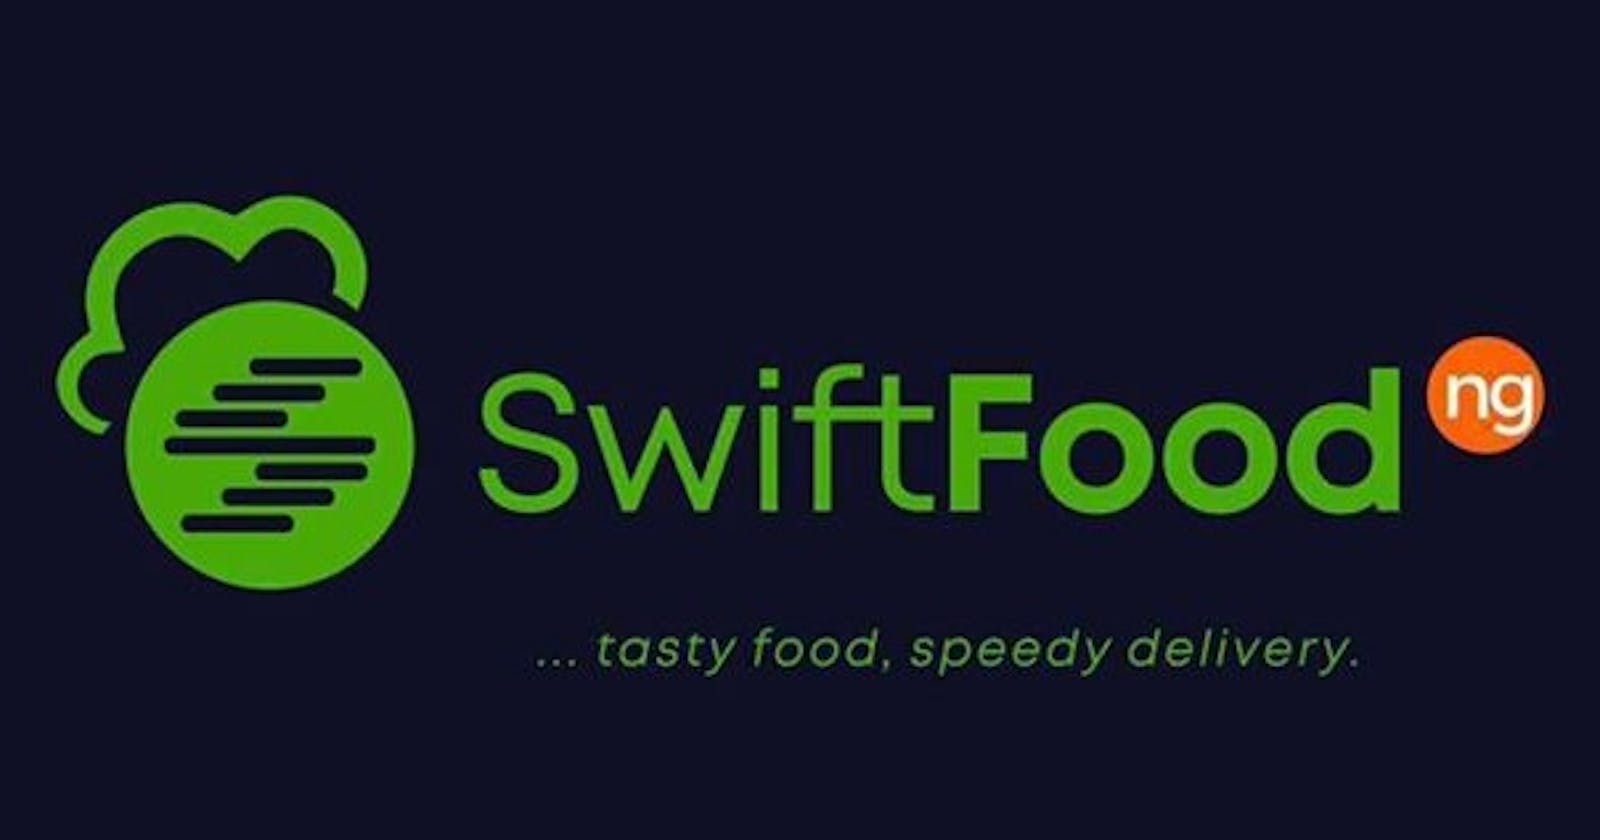 Swift food... Walk through this exciting journey with us.